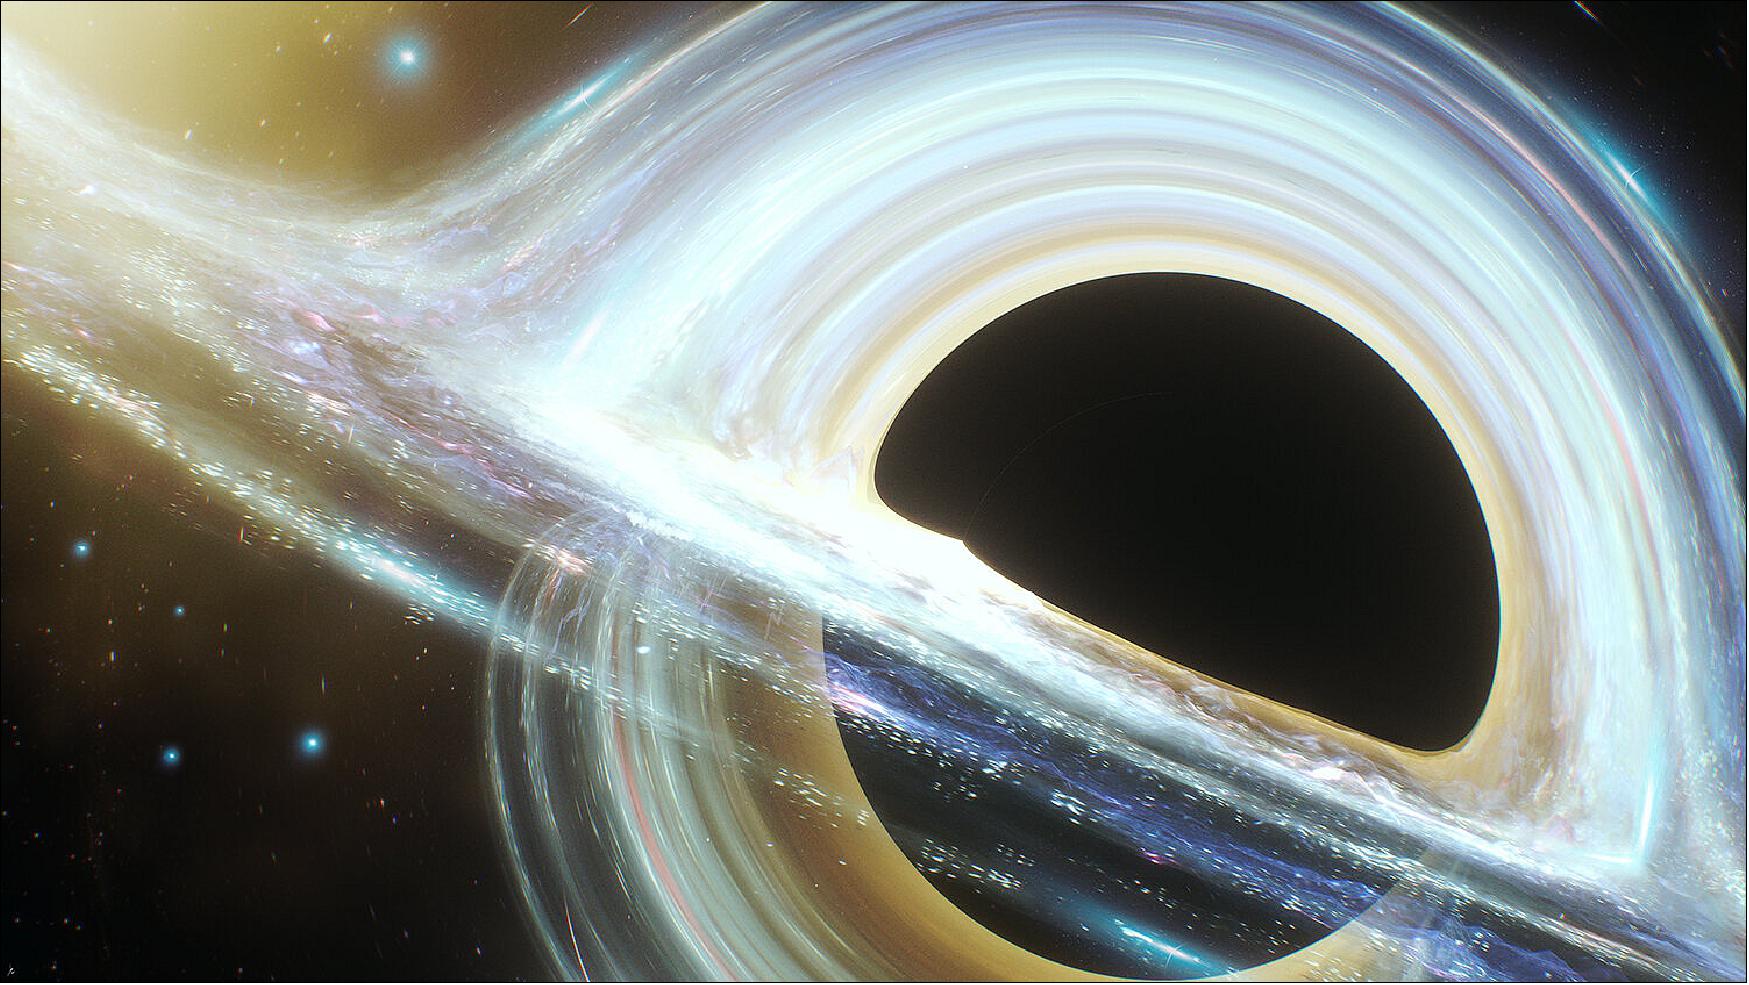 Figure 51: Black holes are celestial objects so dense that nothing, not even light, can escape their pull. In this artist’s impression, the weird shapes of light around the black hole are what computer simulations predict will happen in the vicinity of its intense gravitational field (image credit: ESA/XMM-Newton/I. de la Calle)